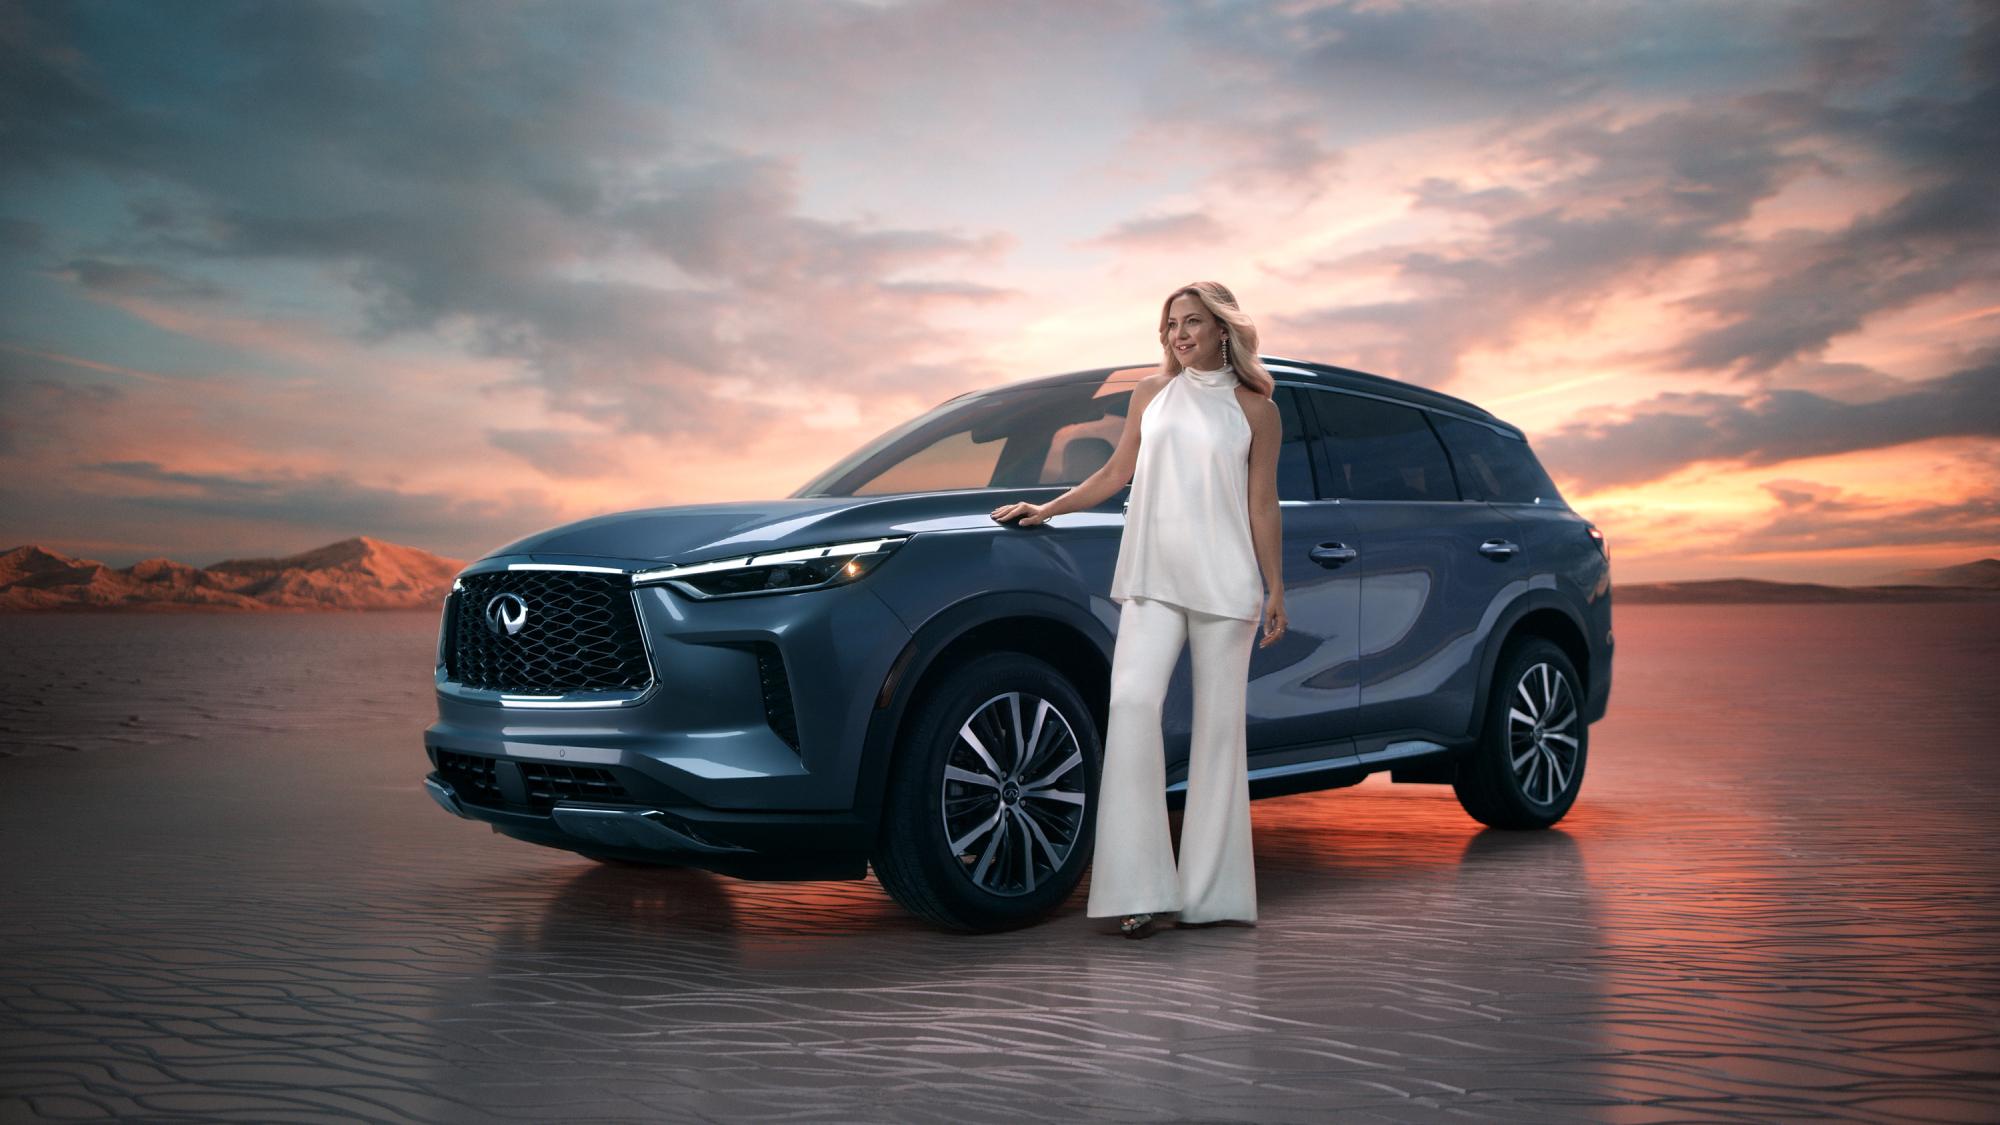 Kate Hudson stars as working professional and parent Claire in a commercial for the new 2022 Infiniti QX60.